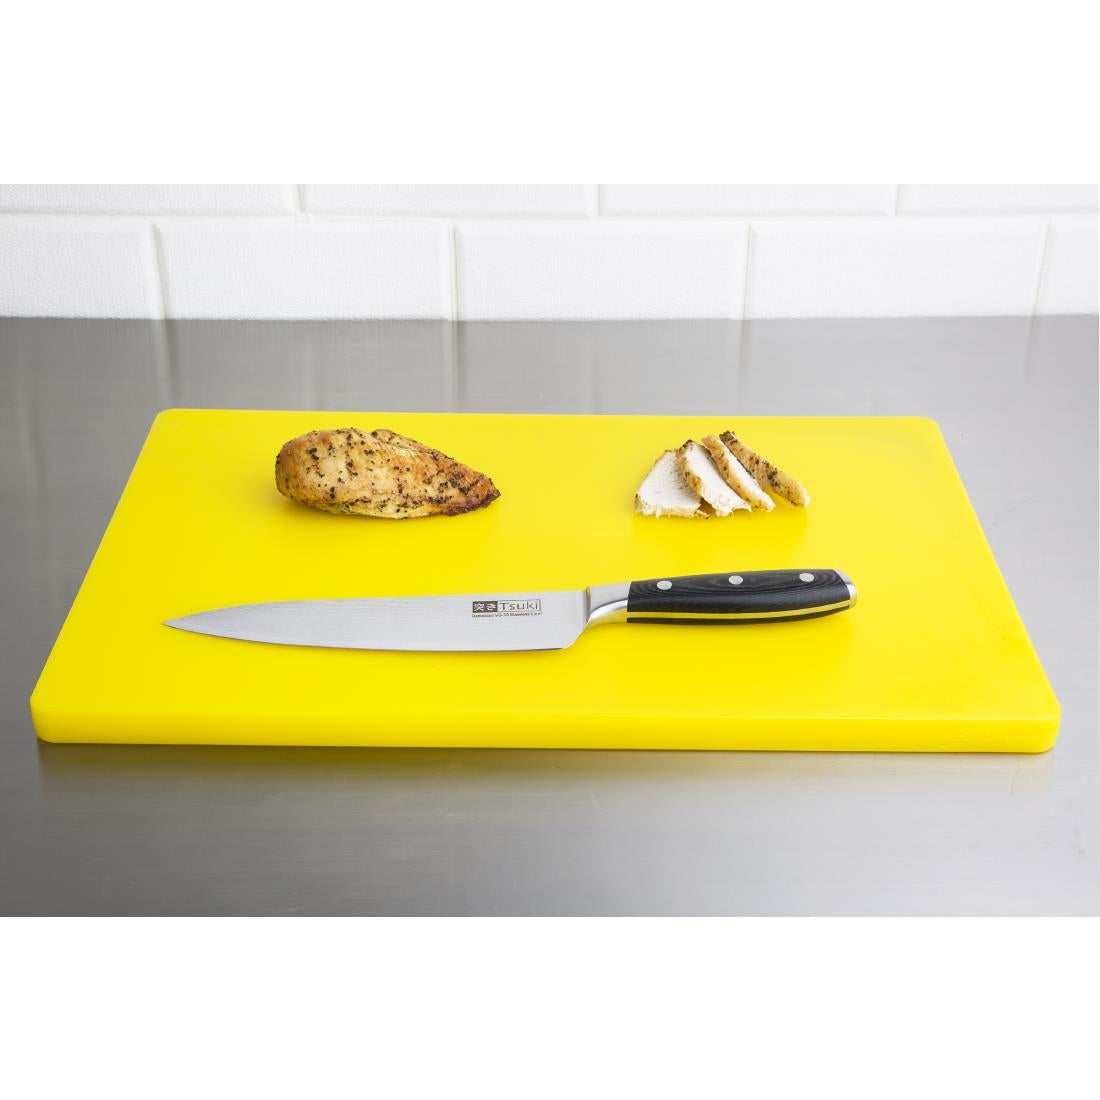 DM002 Hygiplas Extra Thick Low Density Yellow Chopping Board Standard JD Catering Equipment Solutions Ltd